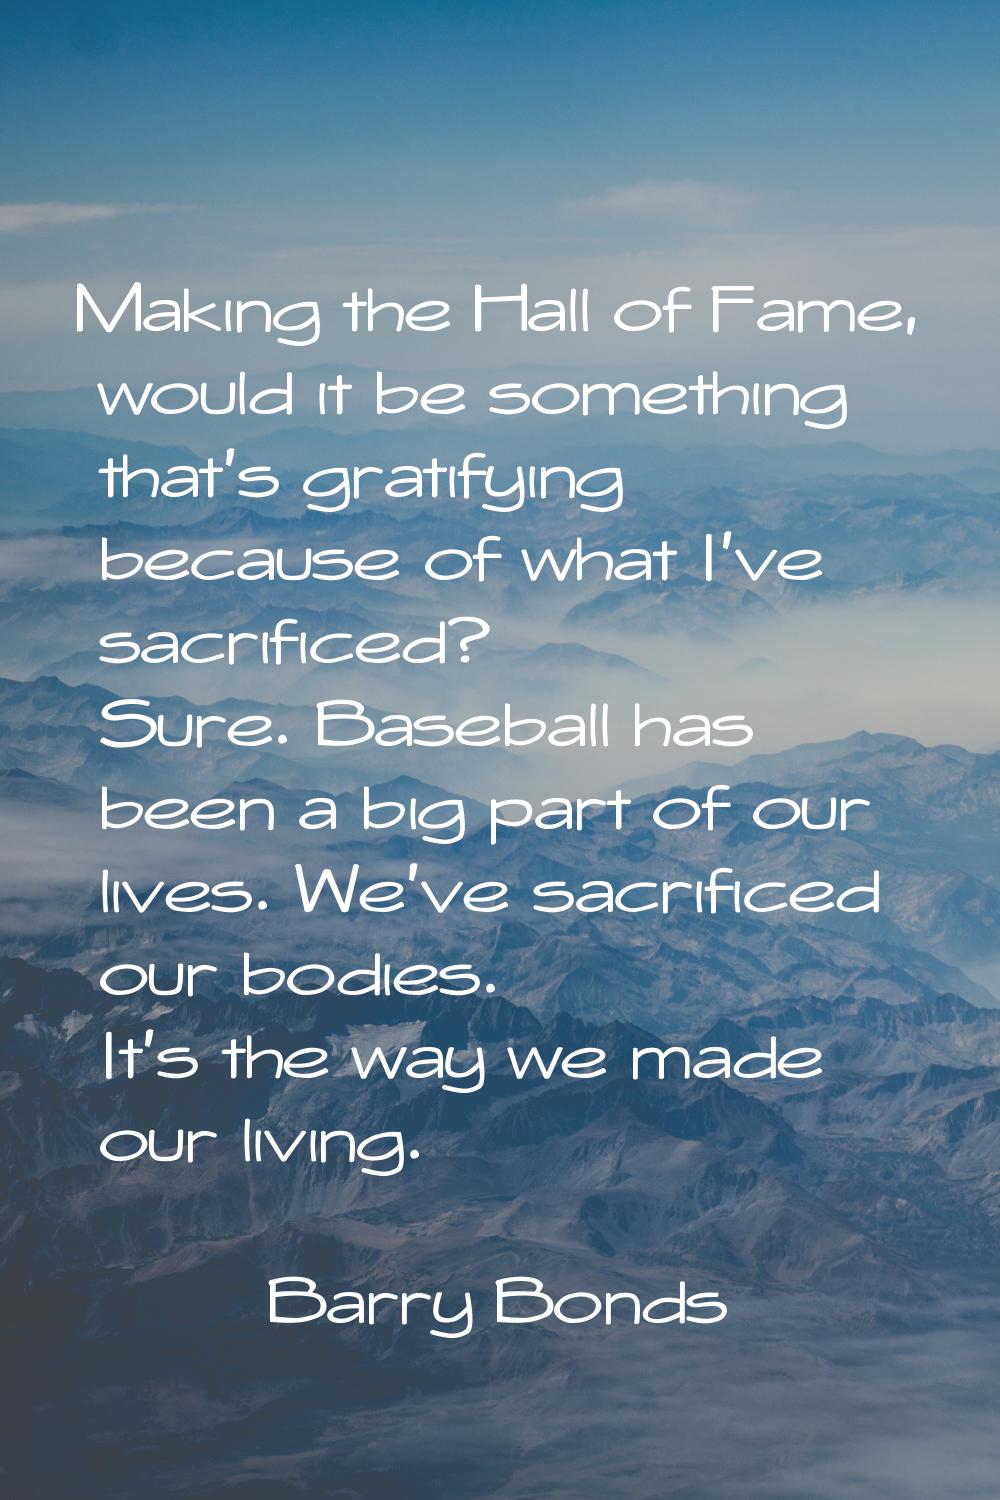 Making the Hall of Fame, would it be something that's gratifying because of what I've sacrificed? S